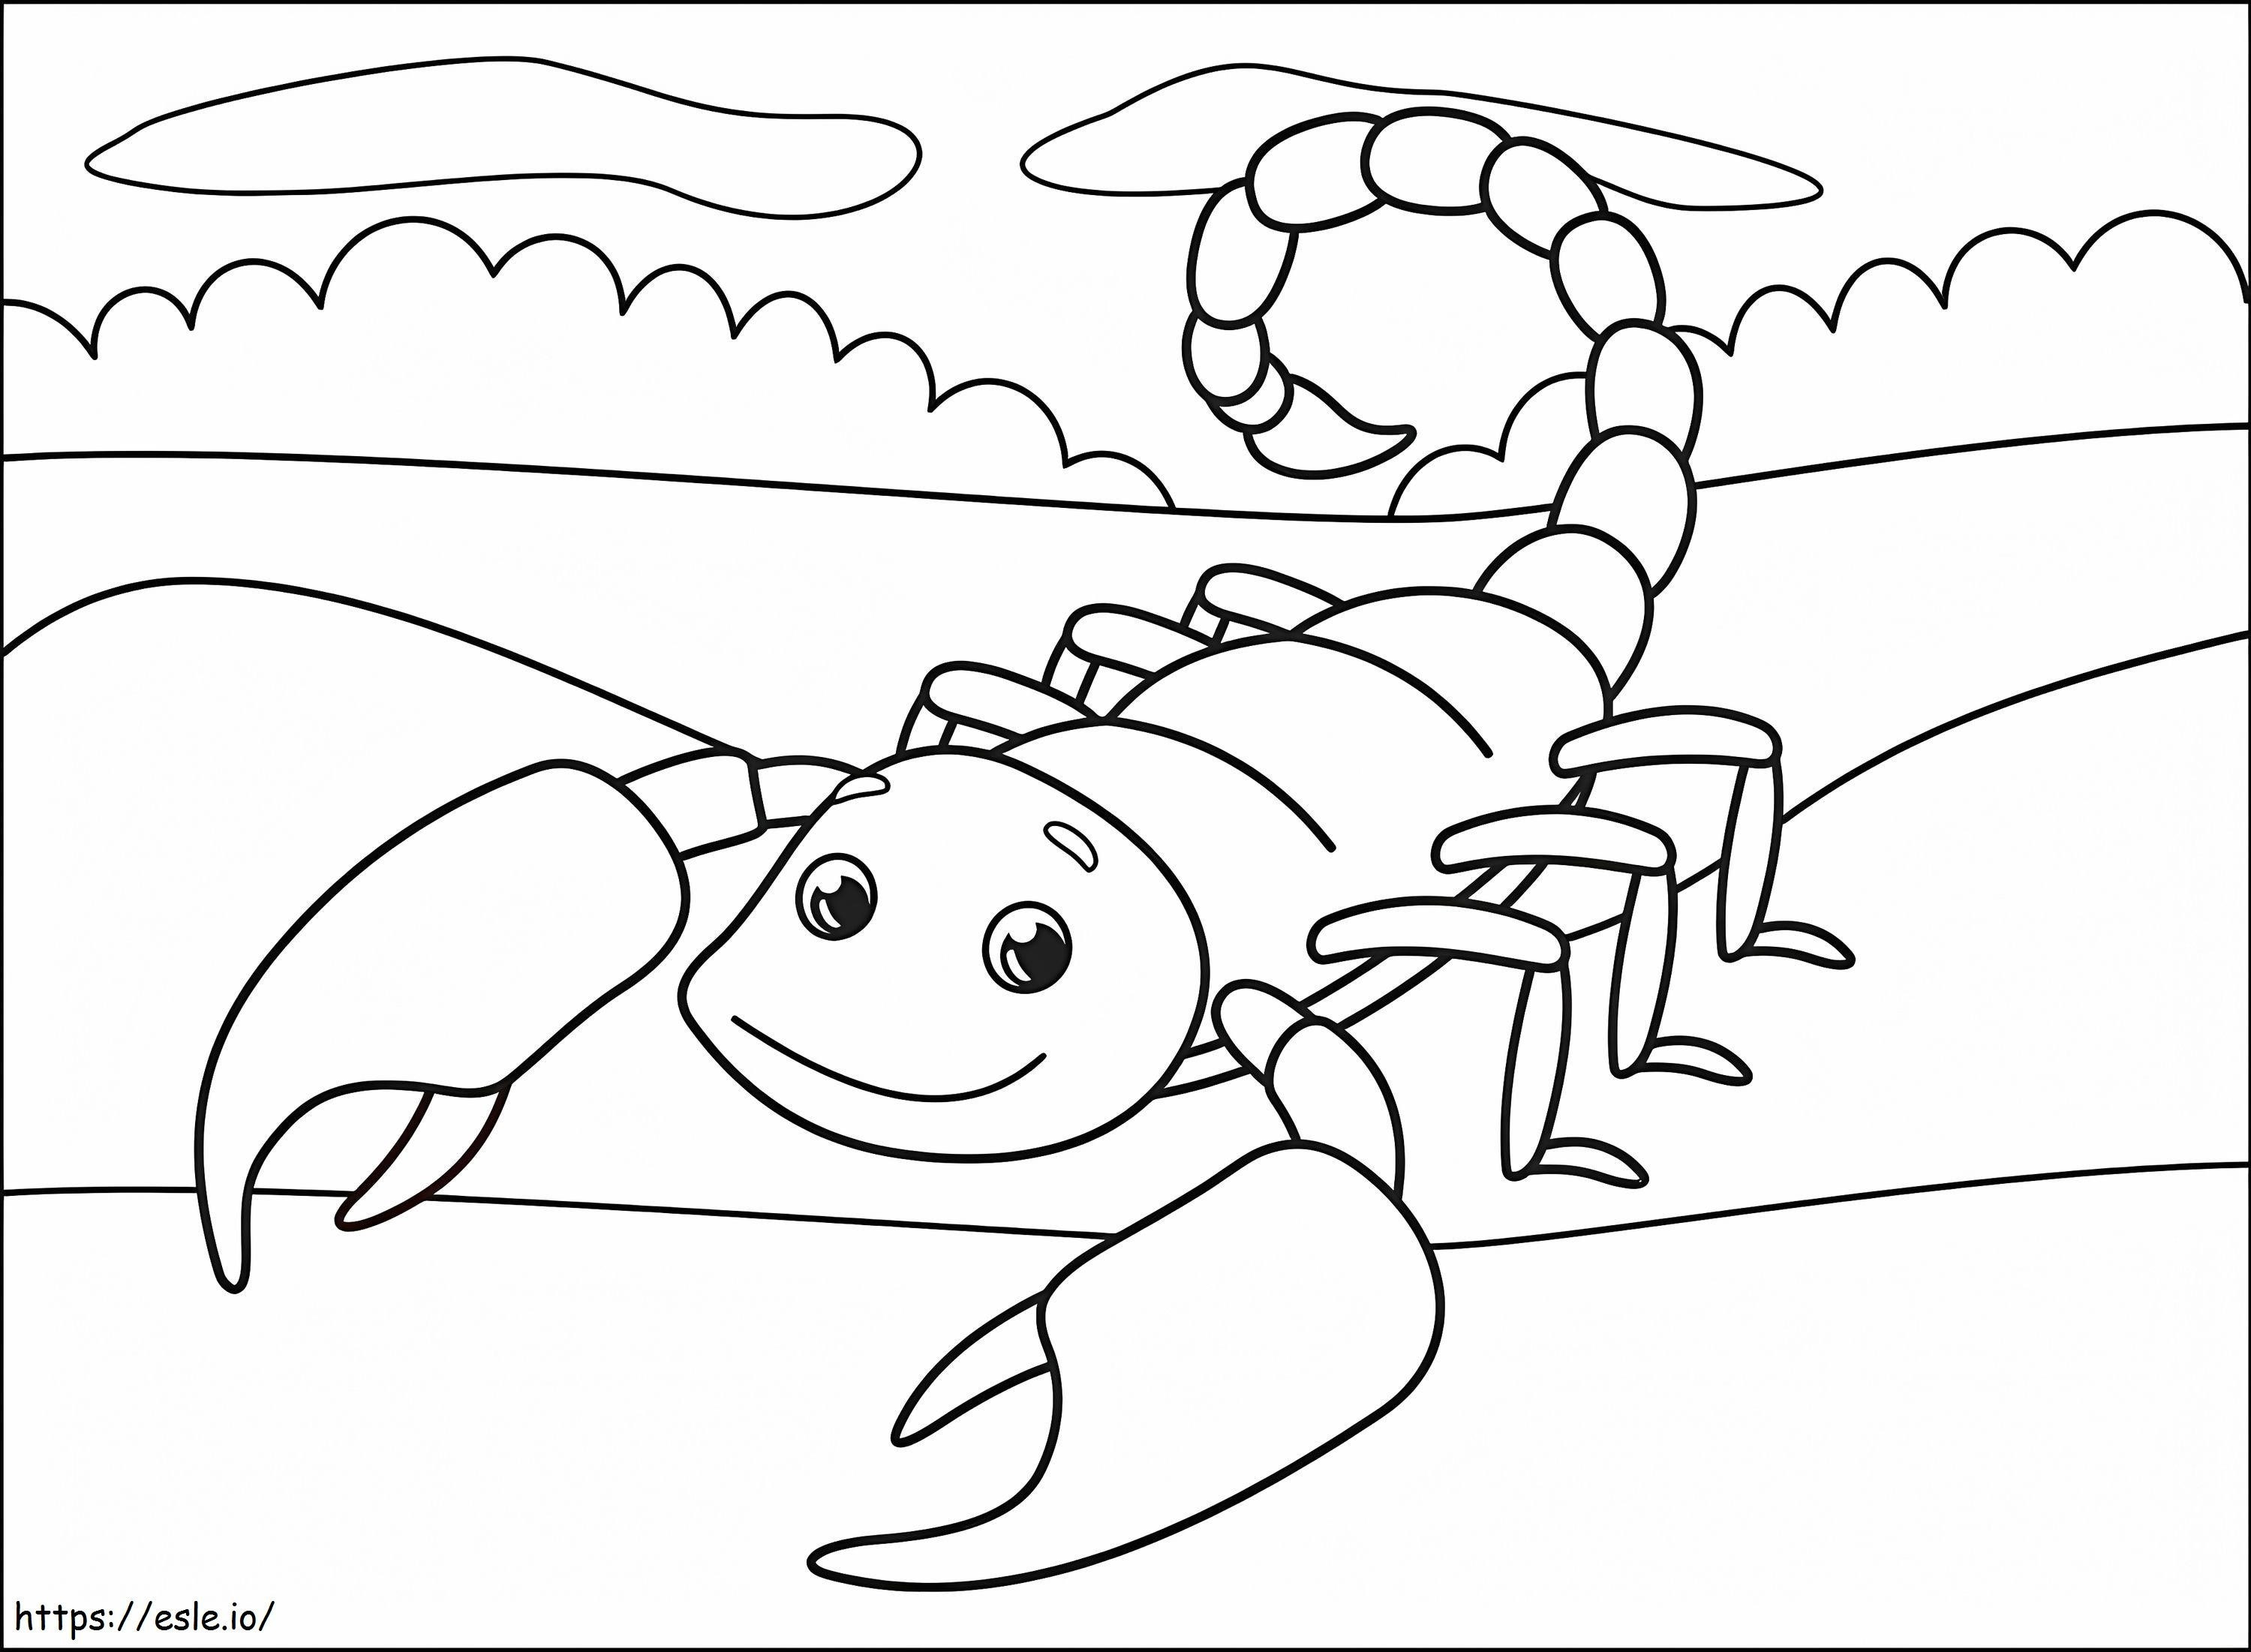 Happy Scorpion coloring page